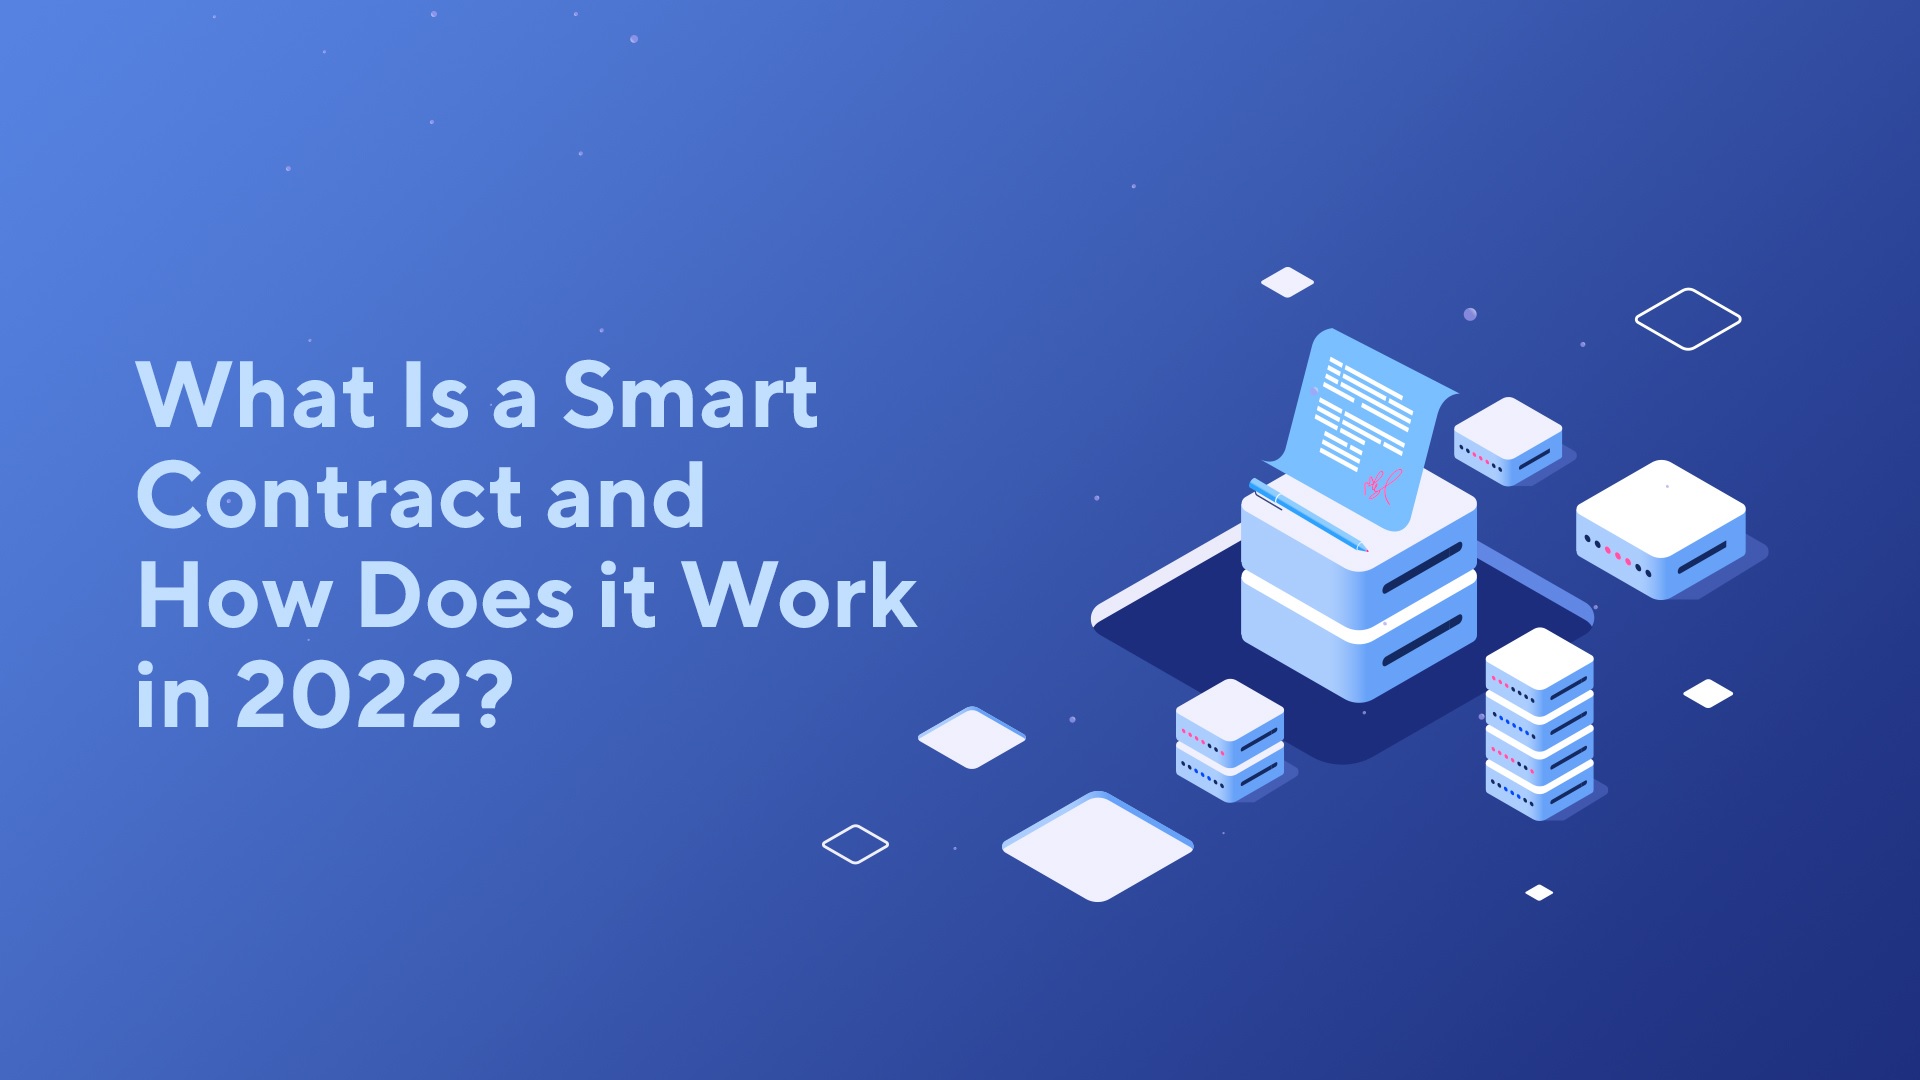 What Is a Smart Contract and How Does it Work in 2022?